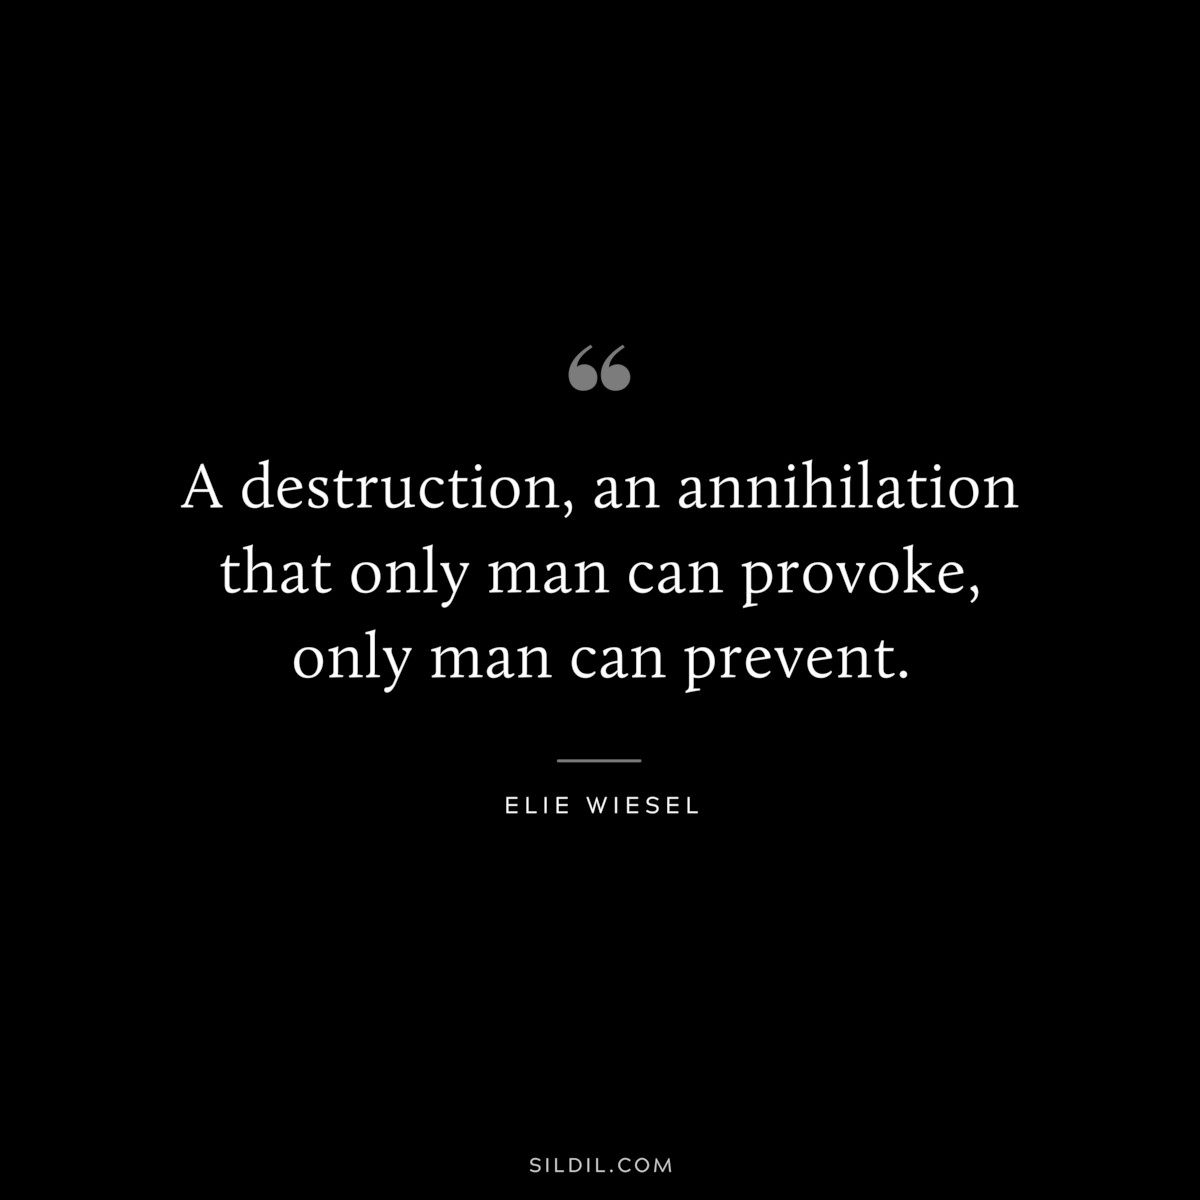 A destruction, an annihilation that only man can provoke, only man can prevent. ― Elie Wiesel